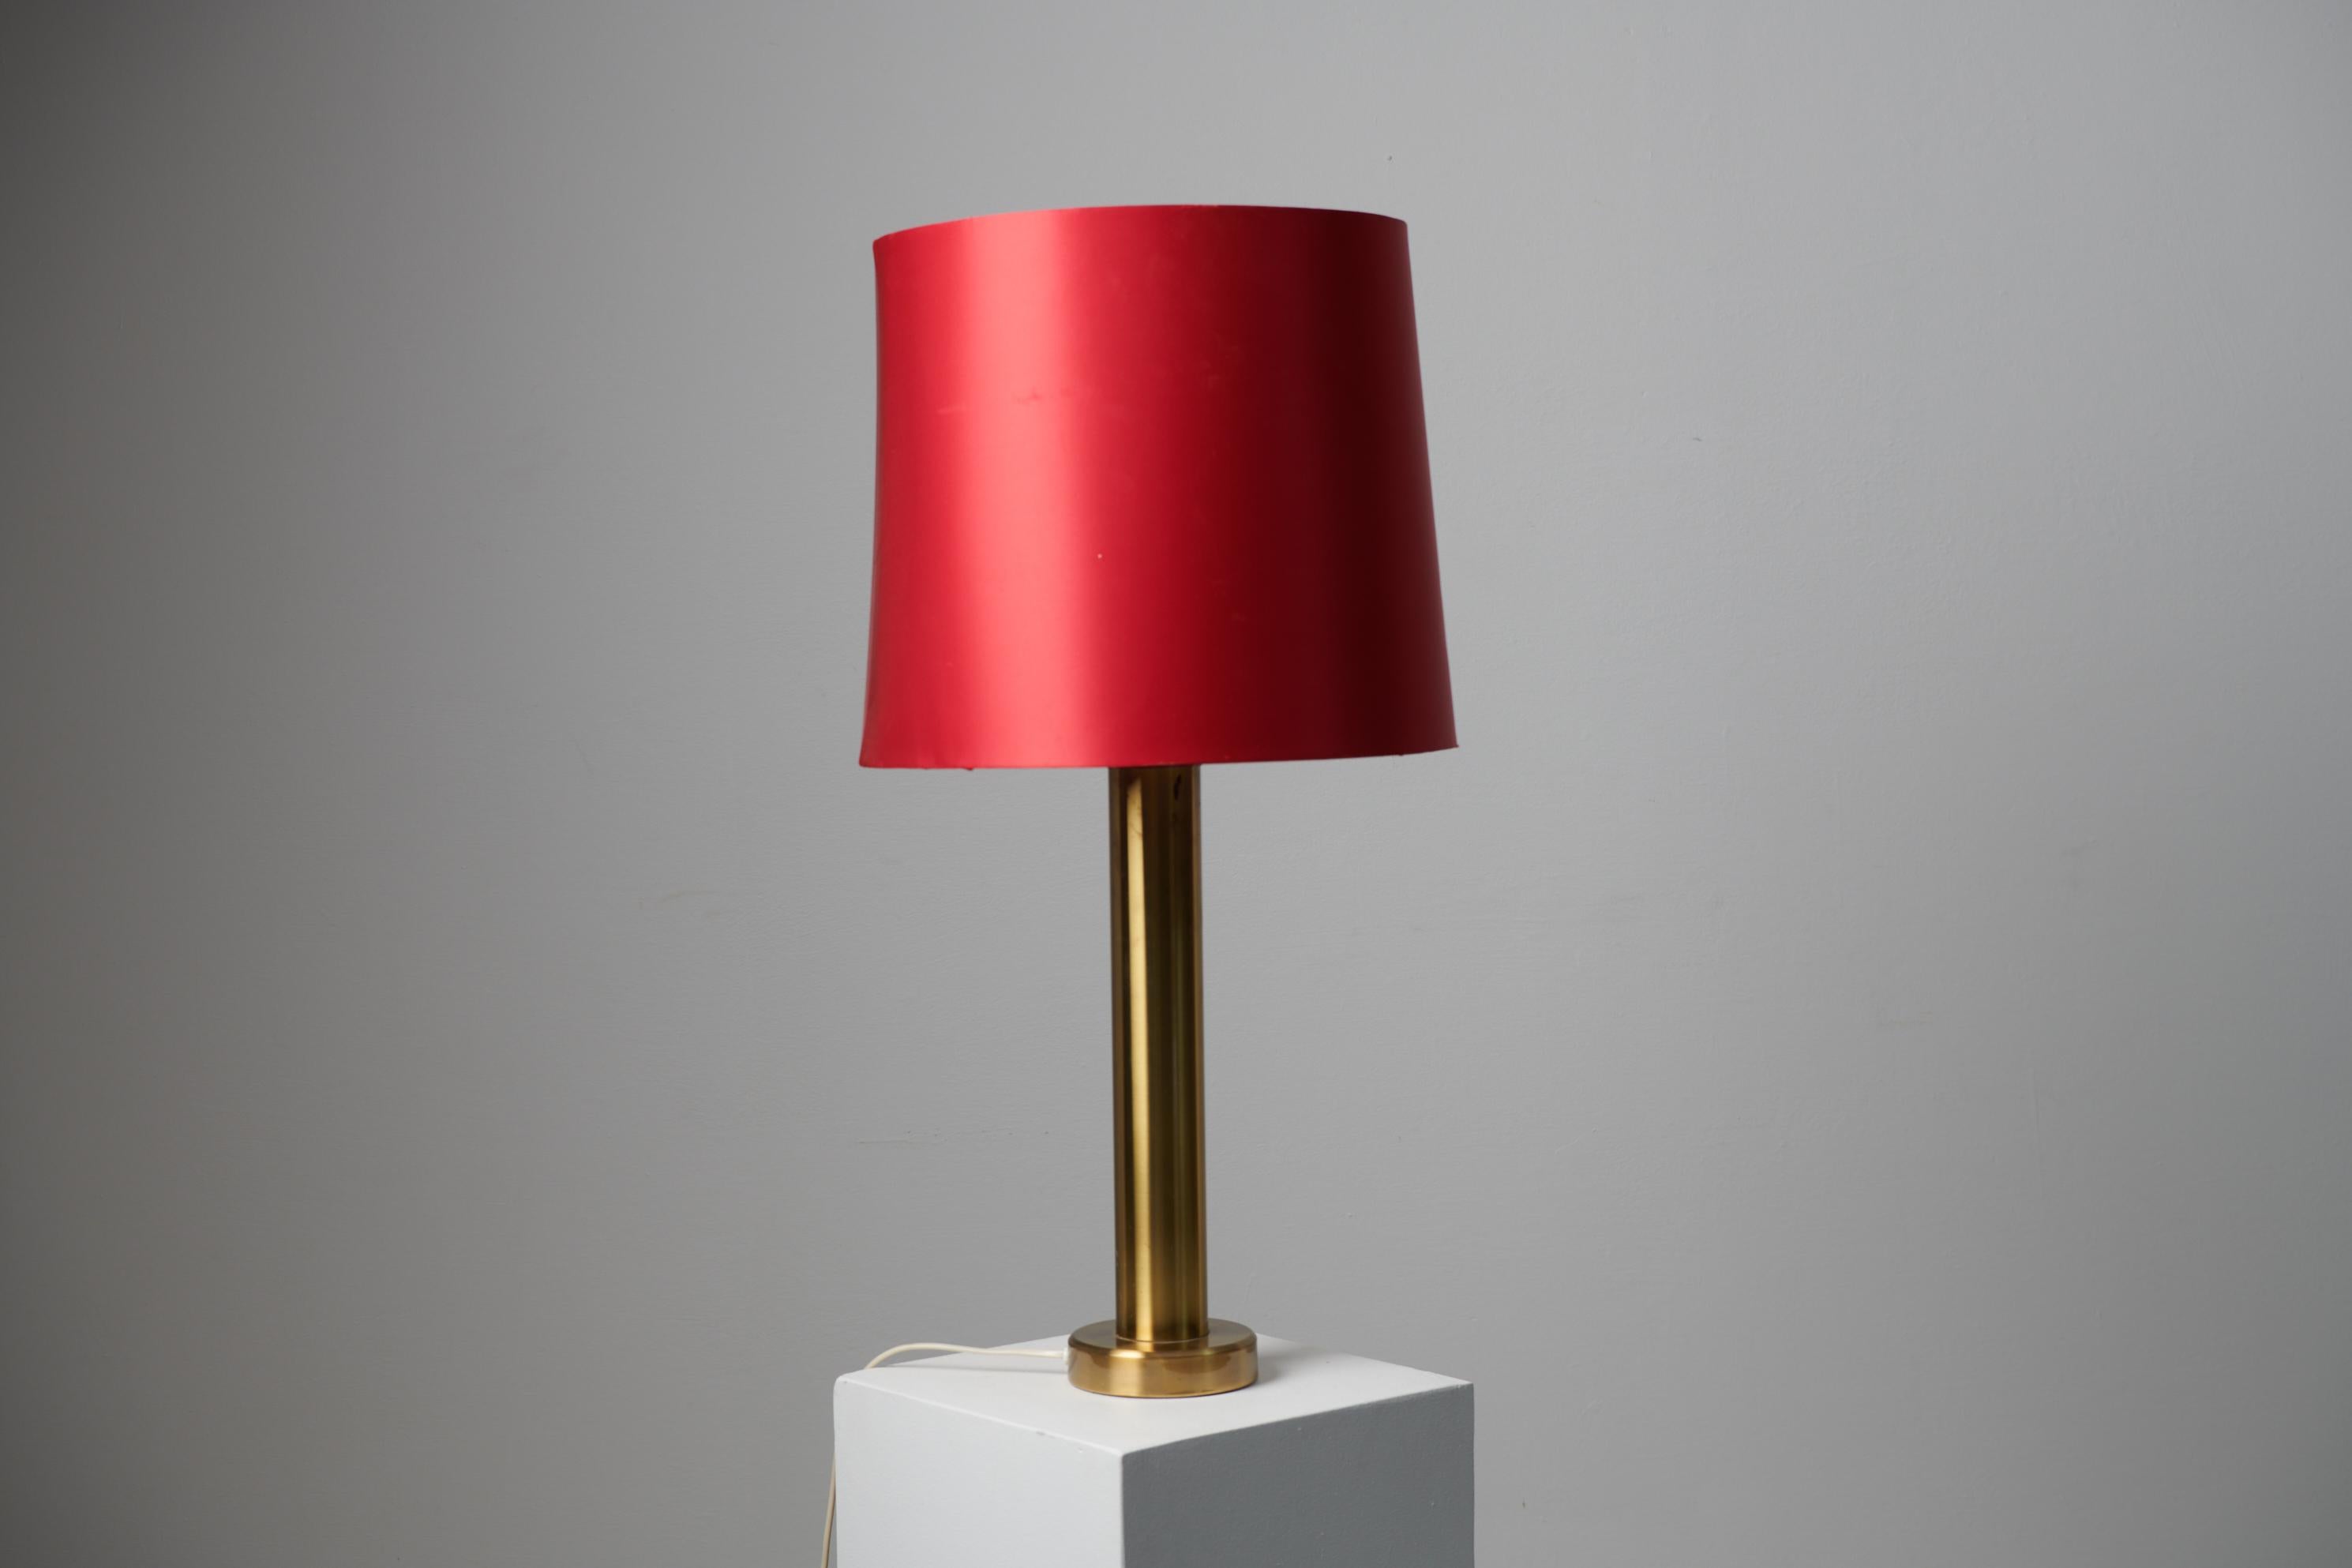 Swedish modern table lamp by Elarmatur Kosta. Step into the chic world of Swedish modern design with this brass table lamp by Elarmatur Kosta. Dating from the latter half of the 20th century, it stands as a timeless piece marked with SM 21 for